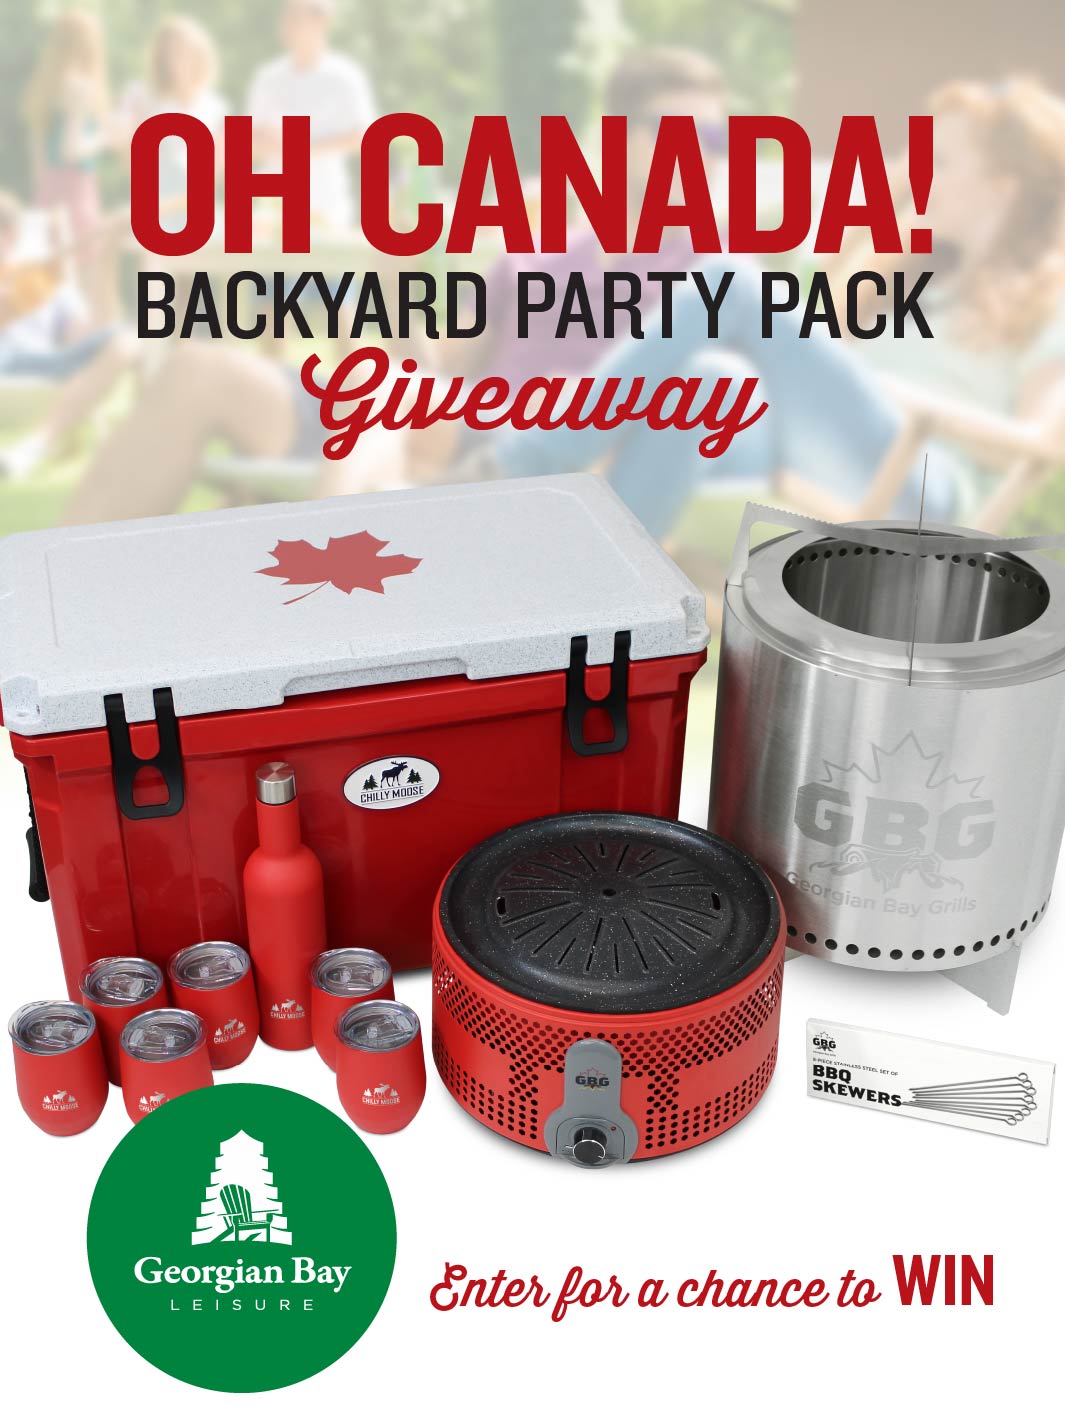 Oh Canada Backyard Party Pack Giveaway